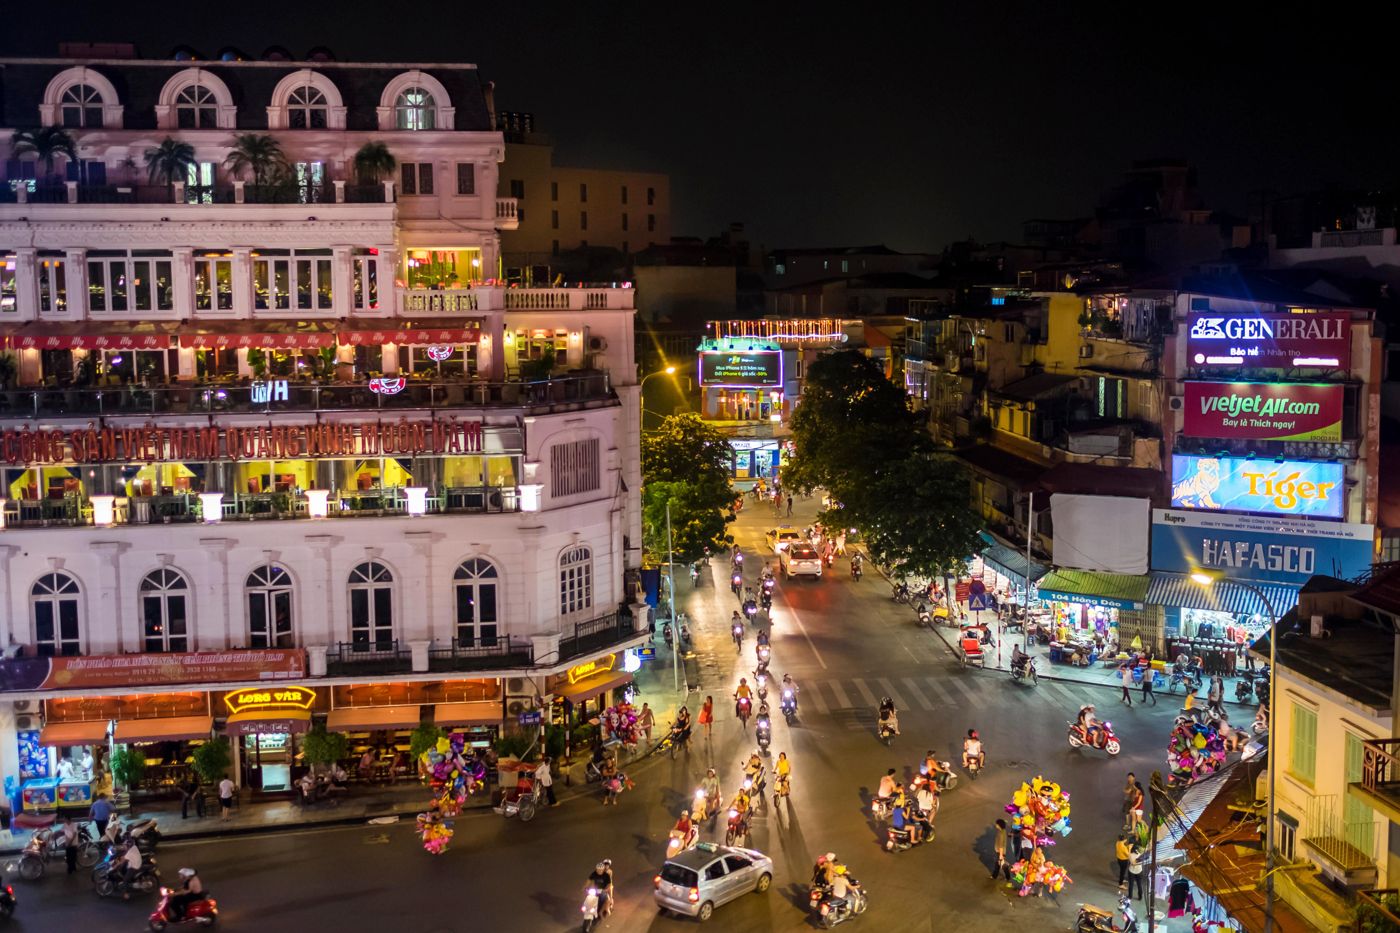 https://theculturetrip.com/asia/vietnam/articles/top-10-things-to-do-in-hanoi-at-night/